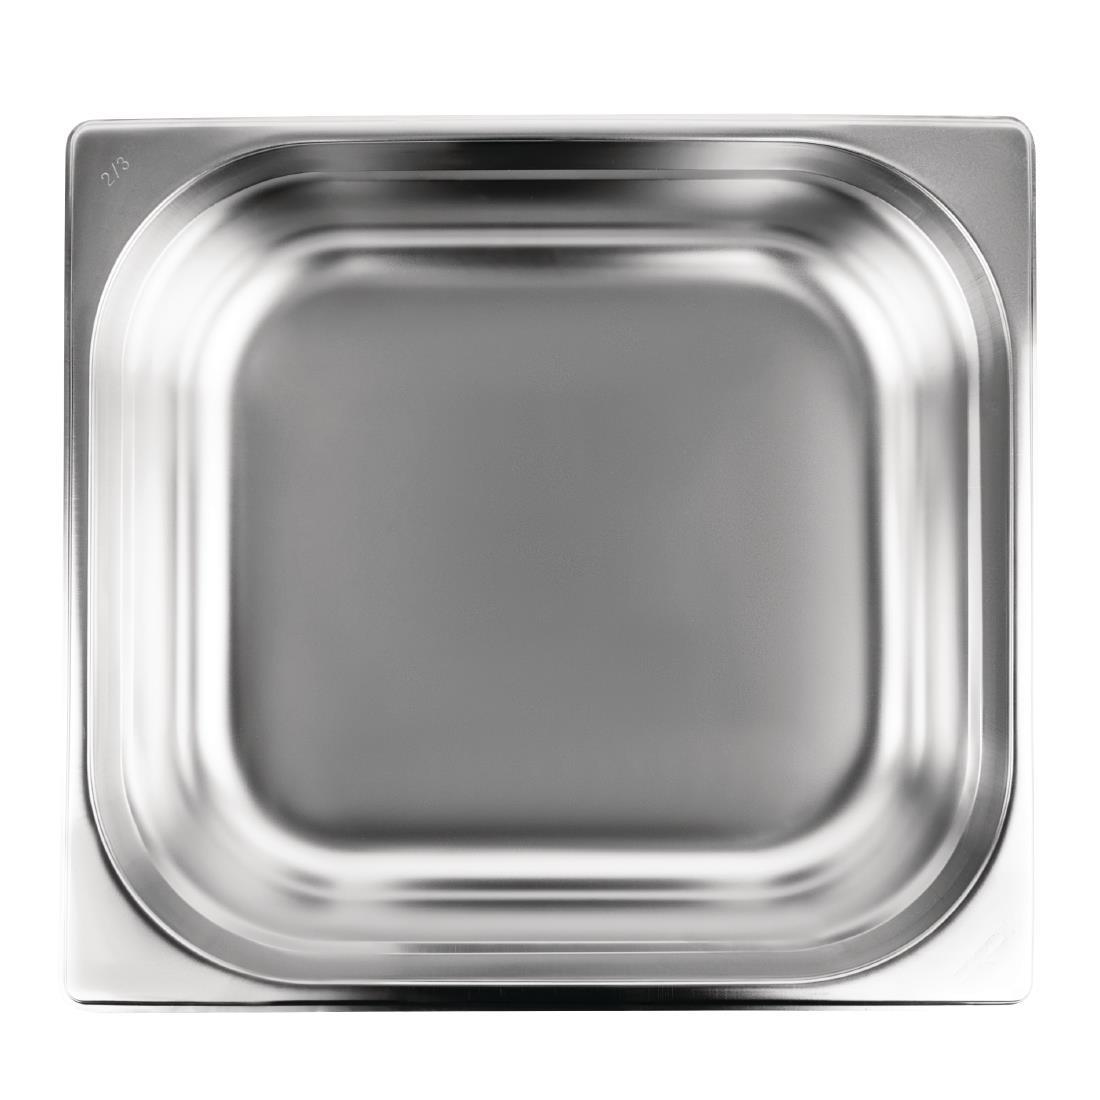 Vogue Stainless Steel 2/3 Gastronorm Pan 100mm - K812  - 3